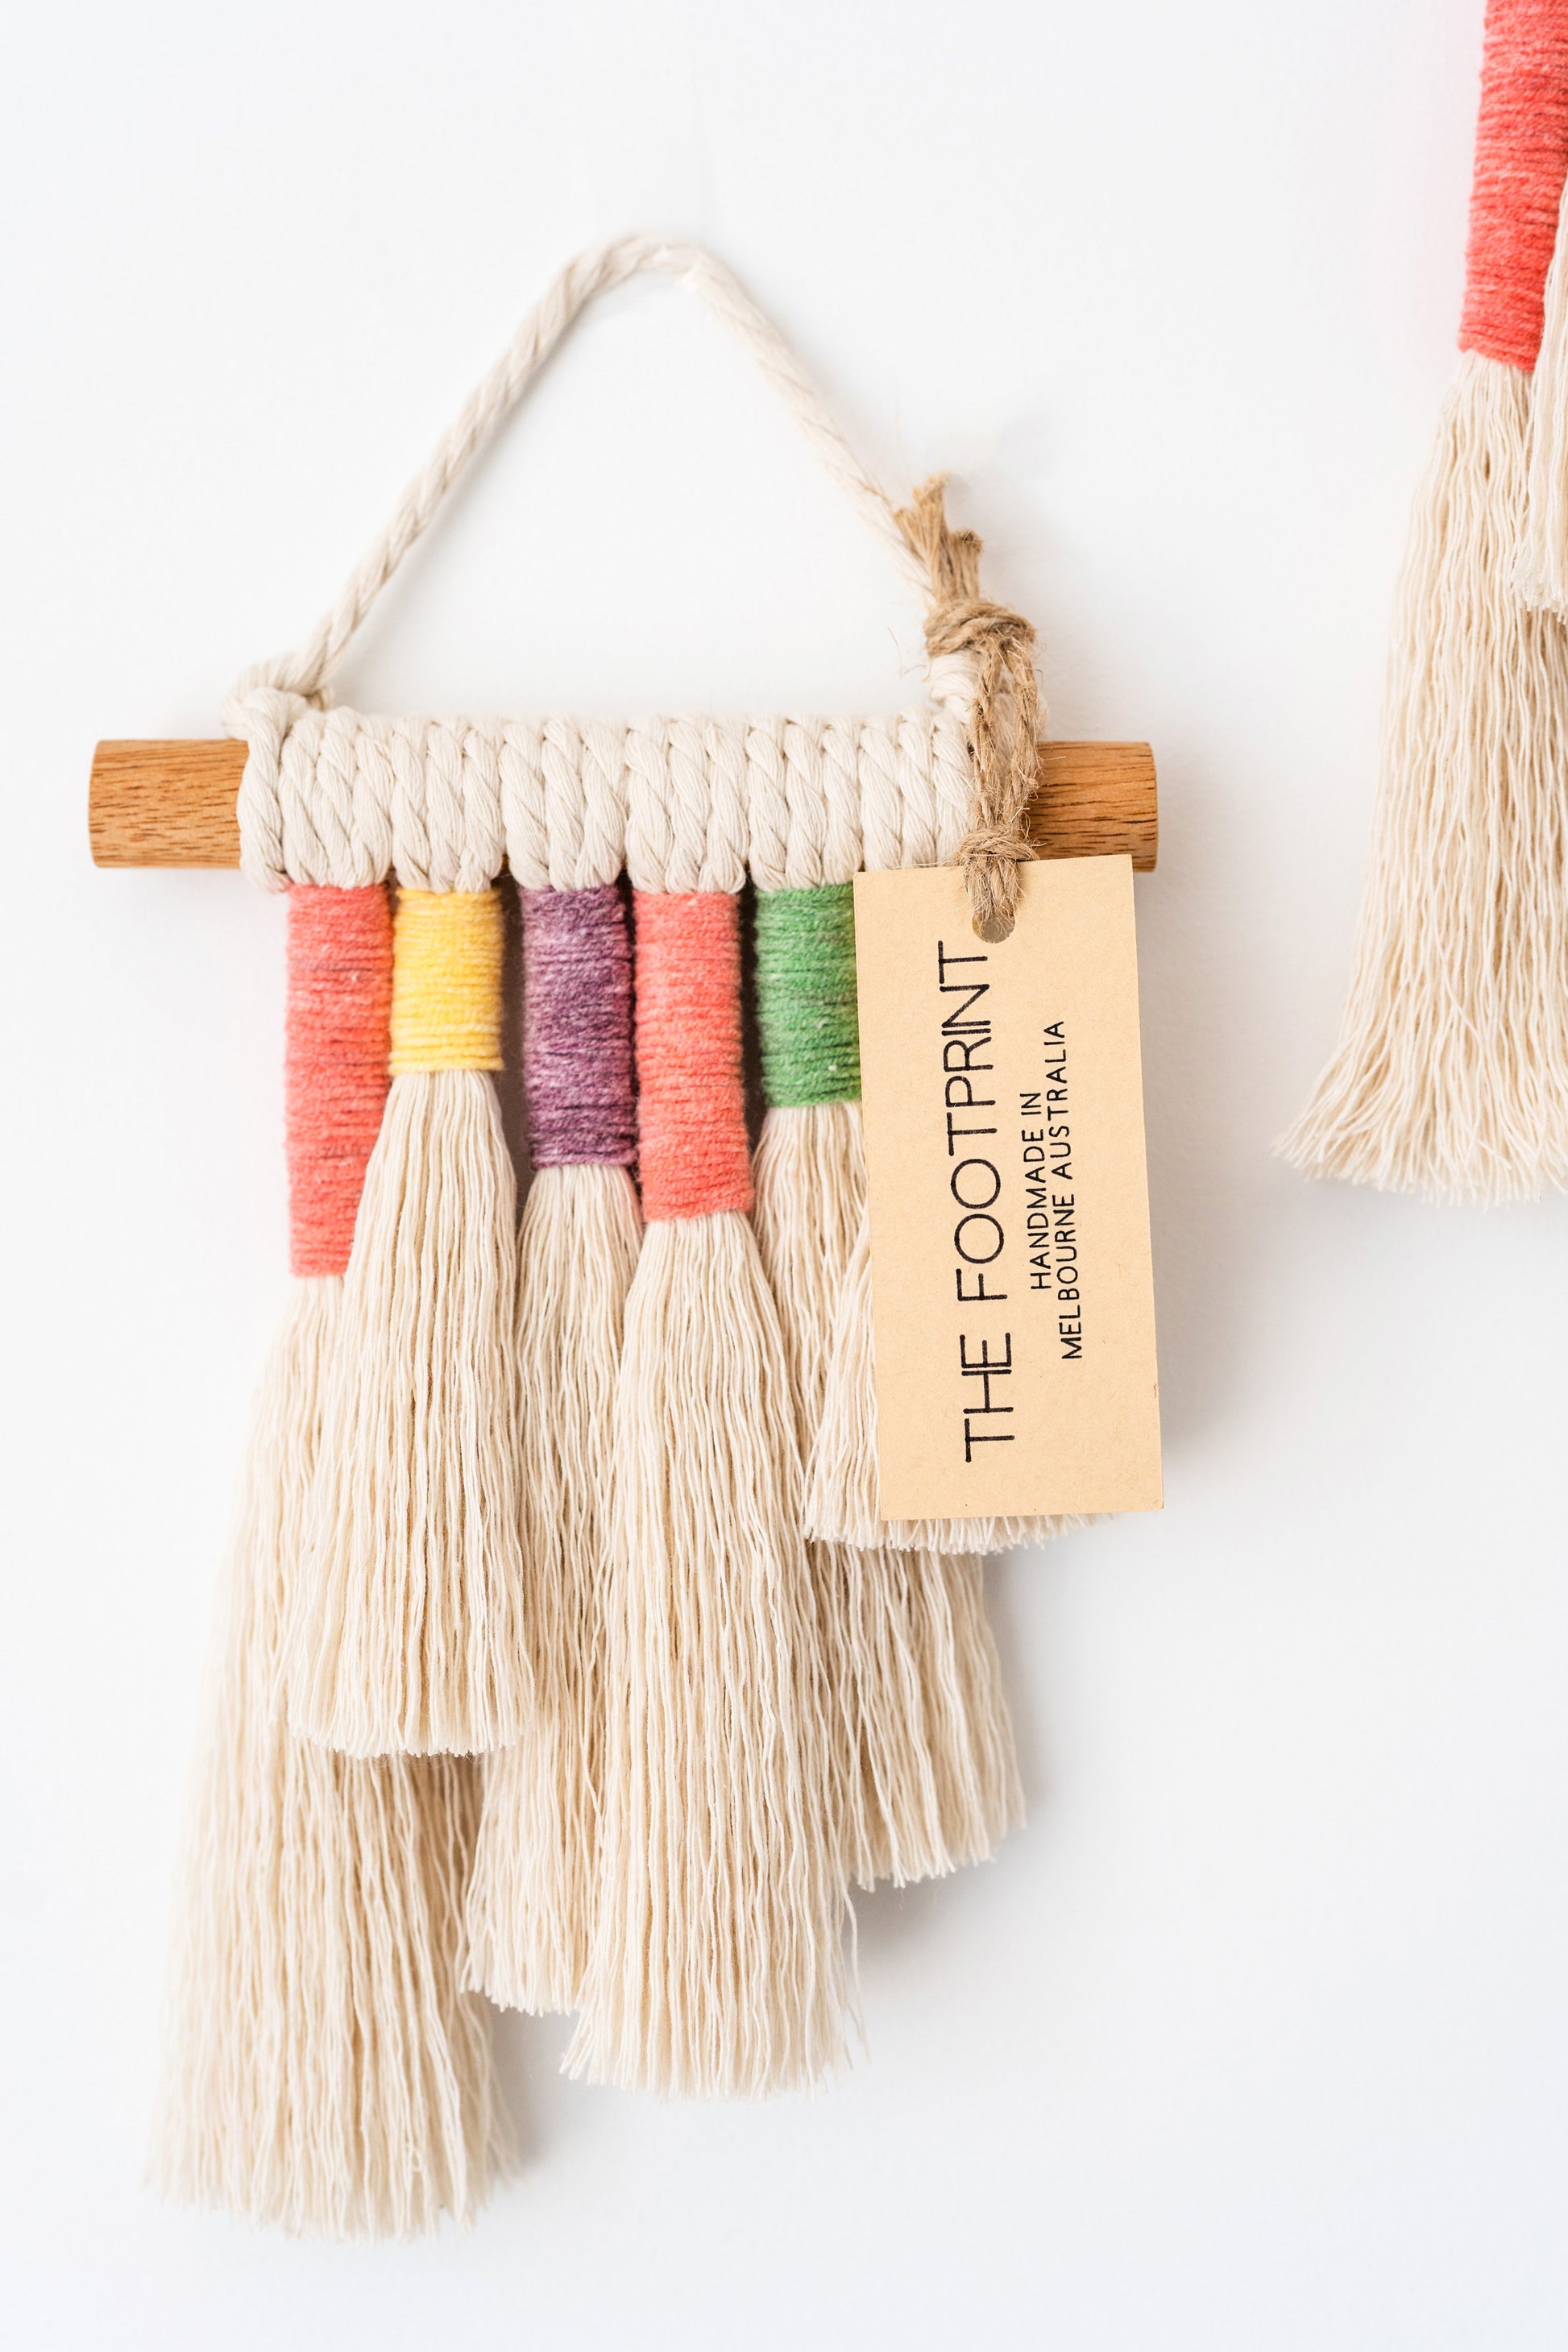 Close up photo of a mini rainbow macrame wall hanging with a product tag on it. Product tag reads The Footprint handmade in Melbourne, Australia